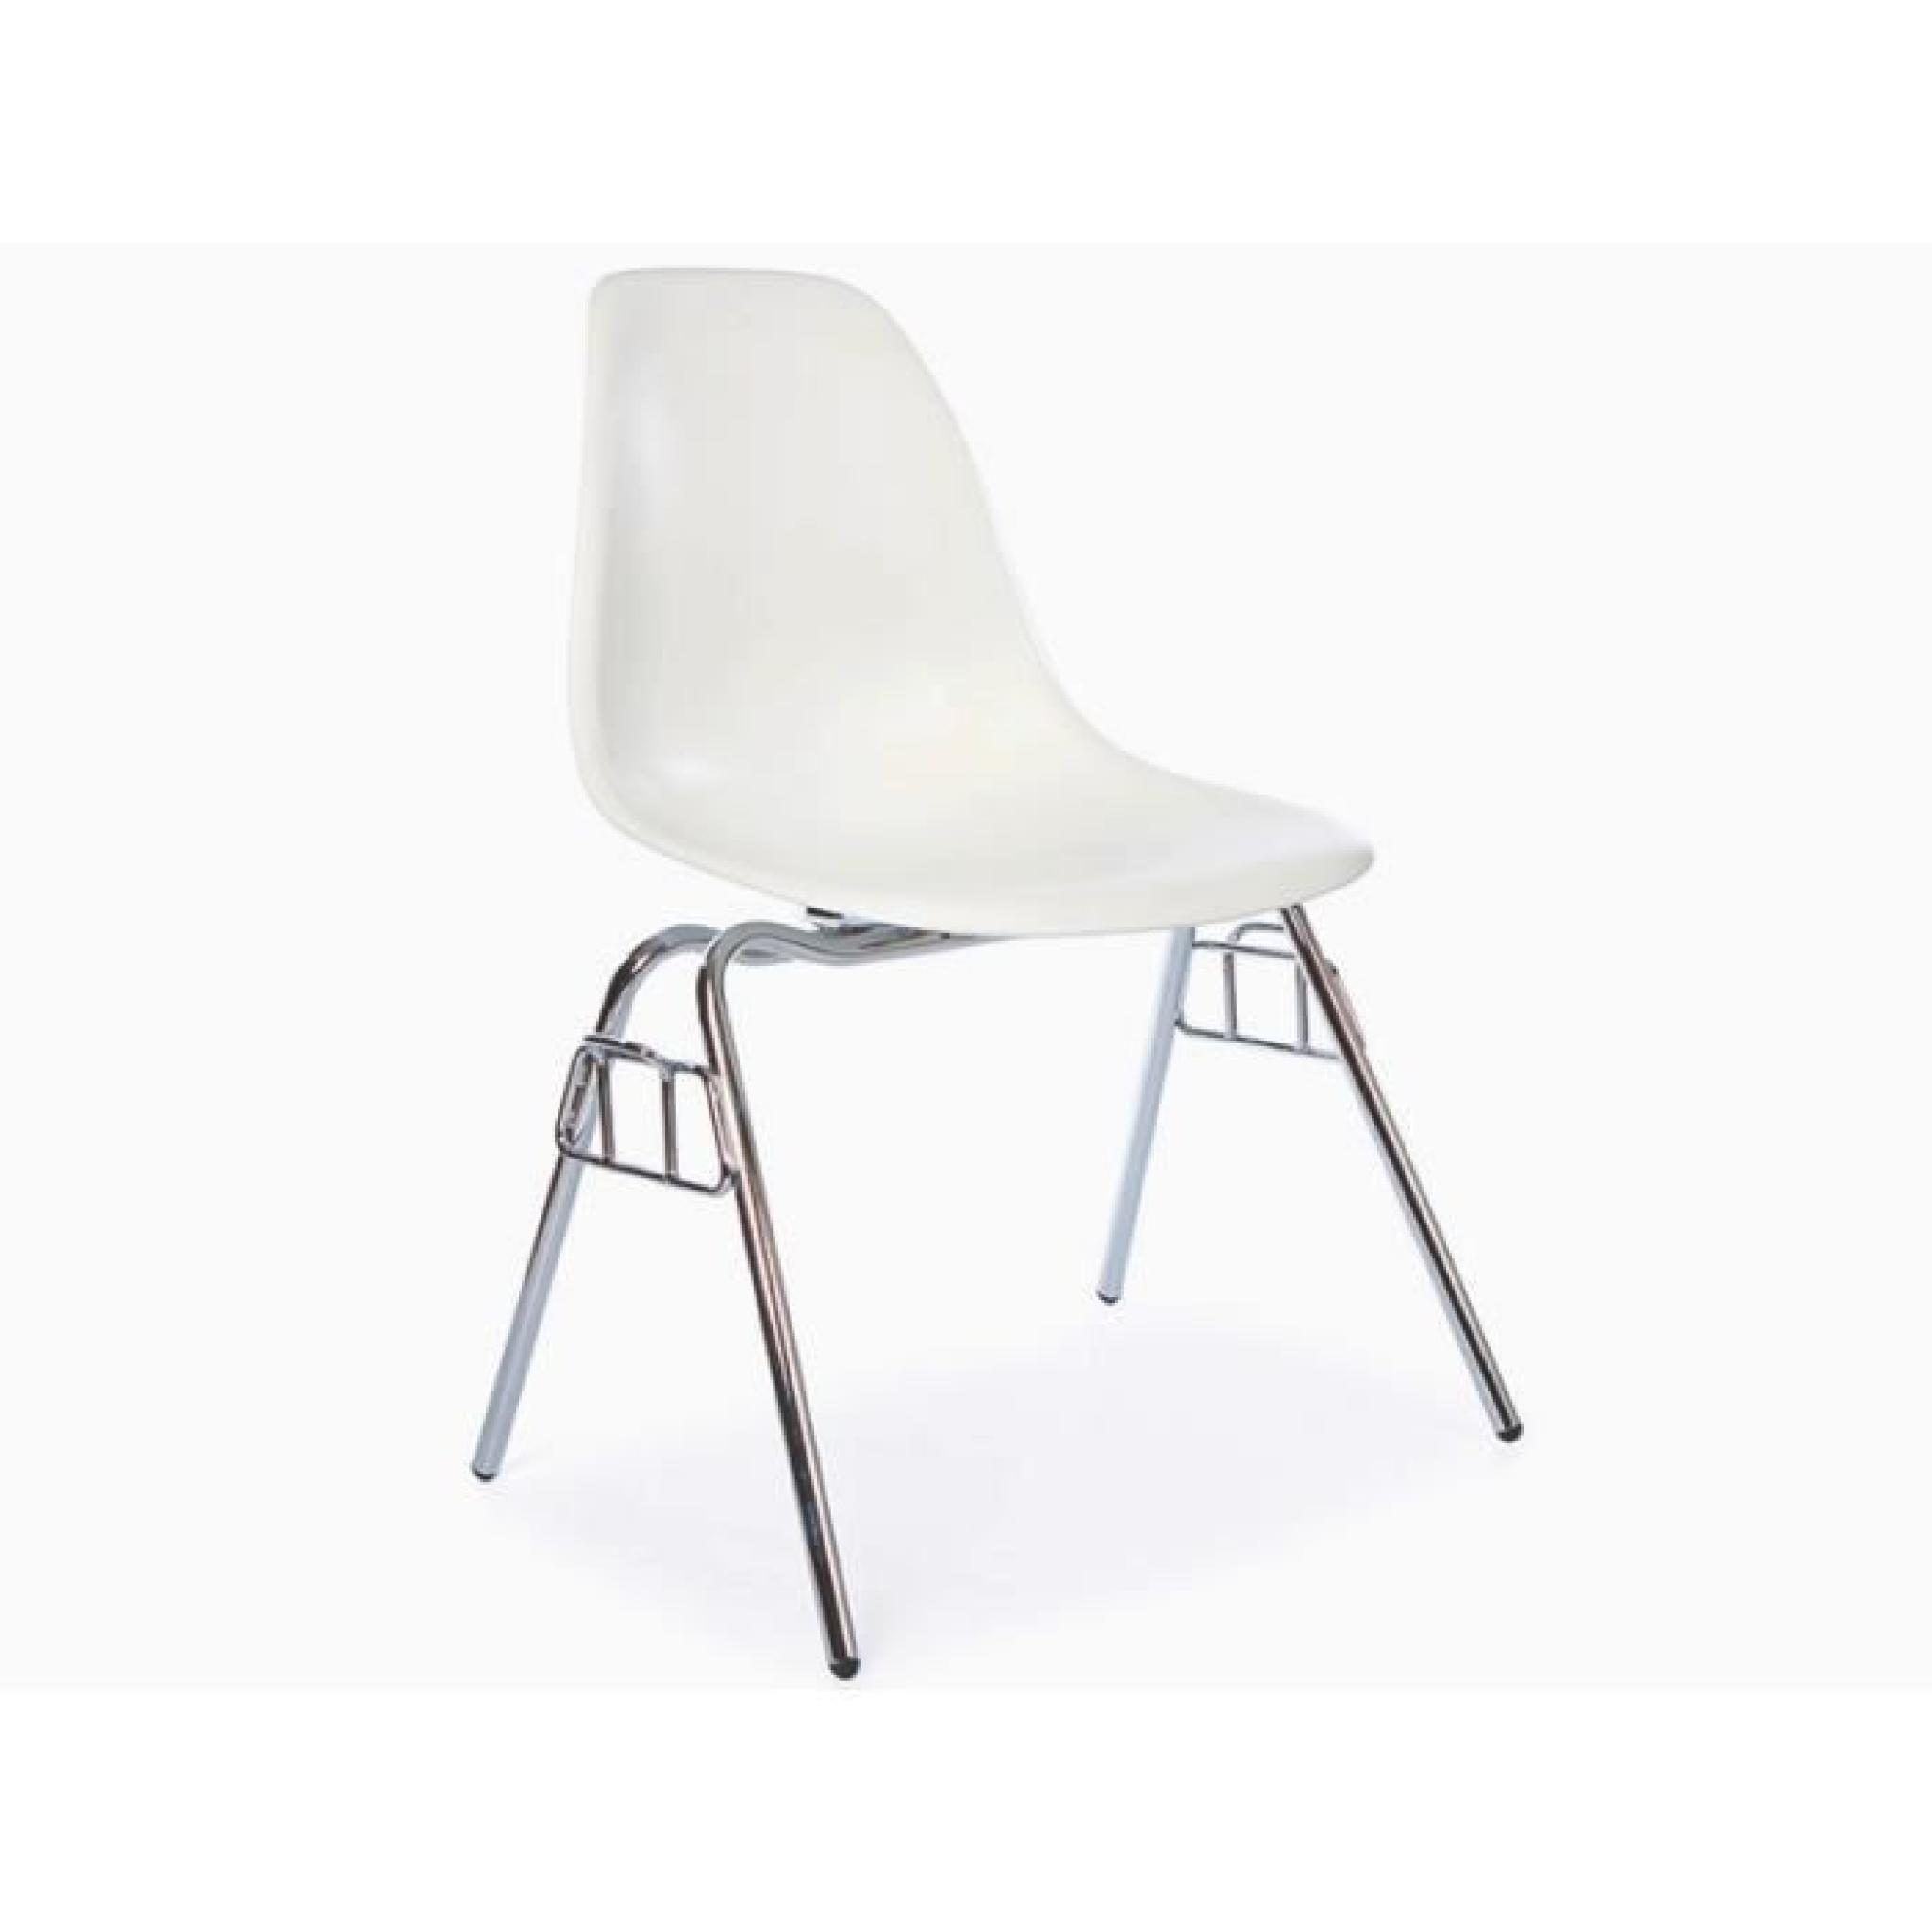 Chaise DSS empilable - Blanc